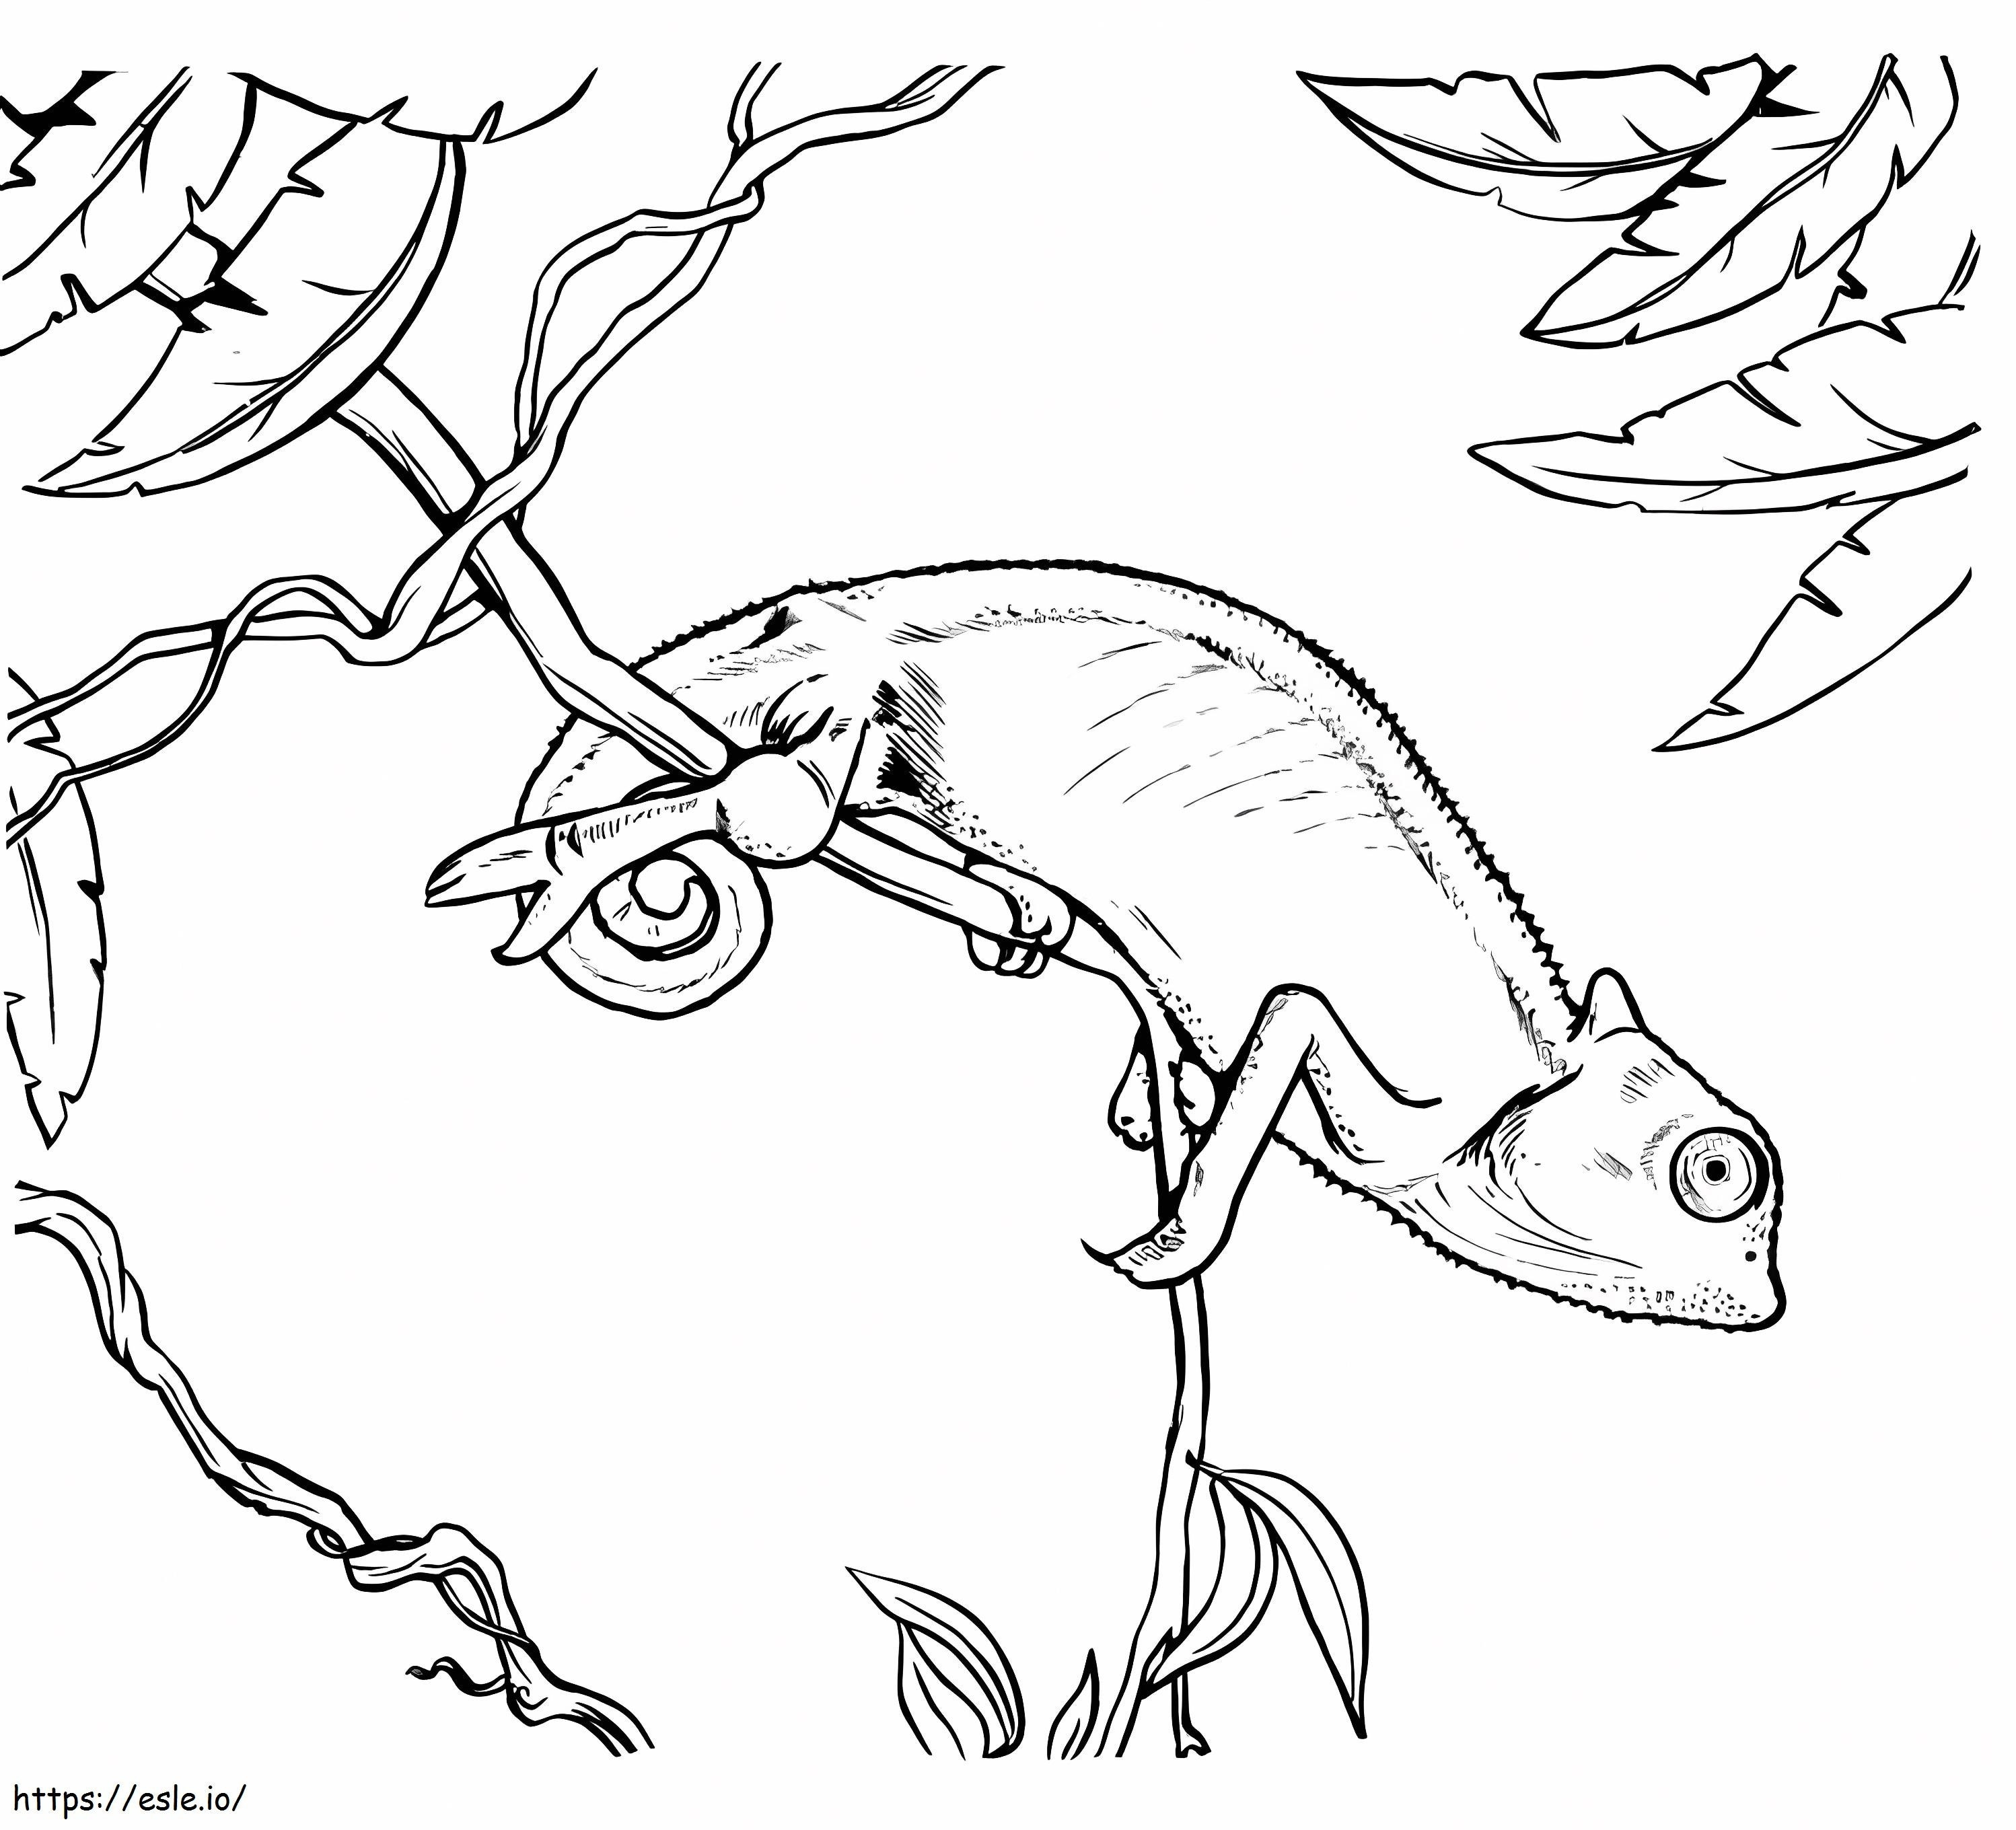 Chameleon 1 coloring page